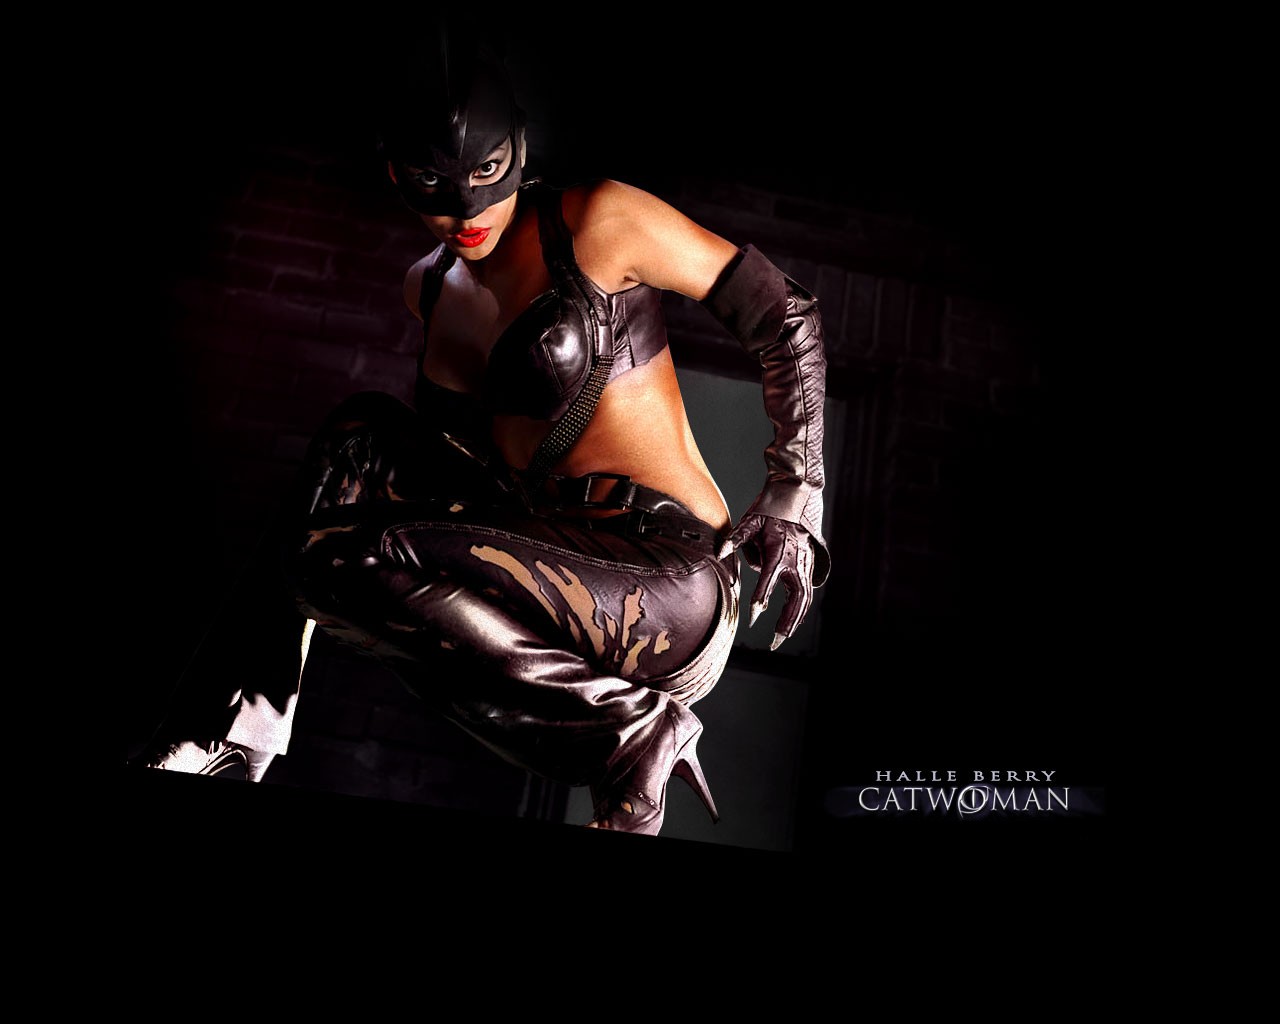 Catwoman The Movie Image HD Wallpaper And Background Photos